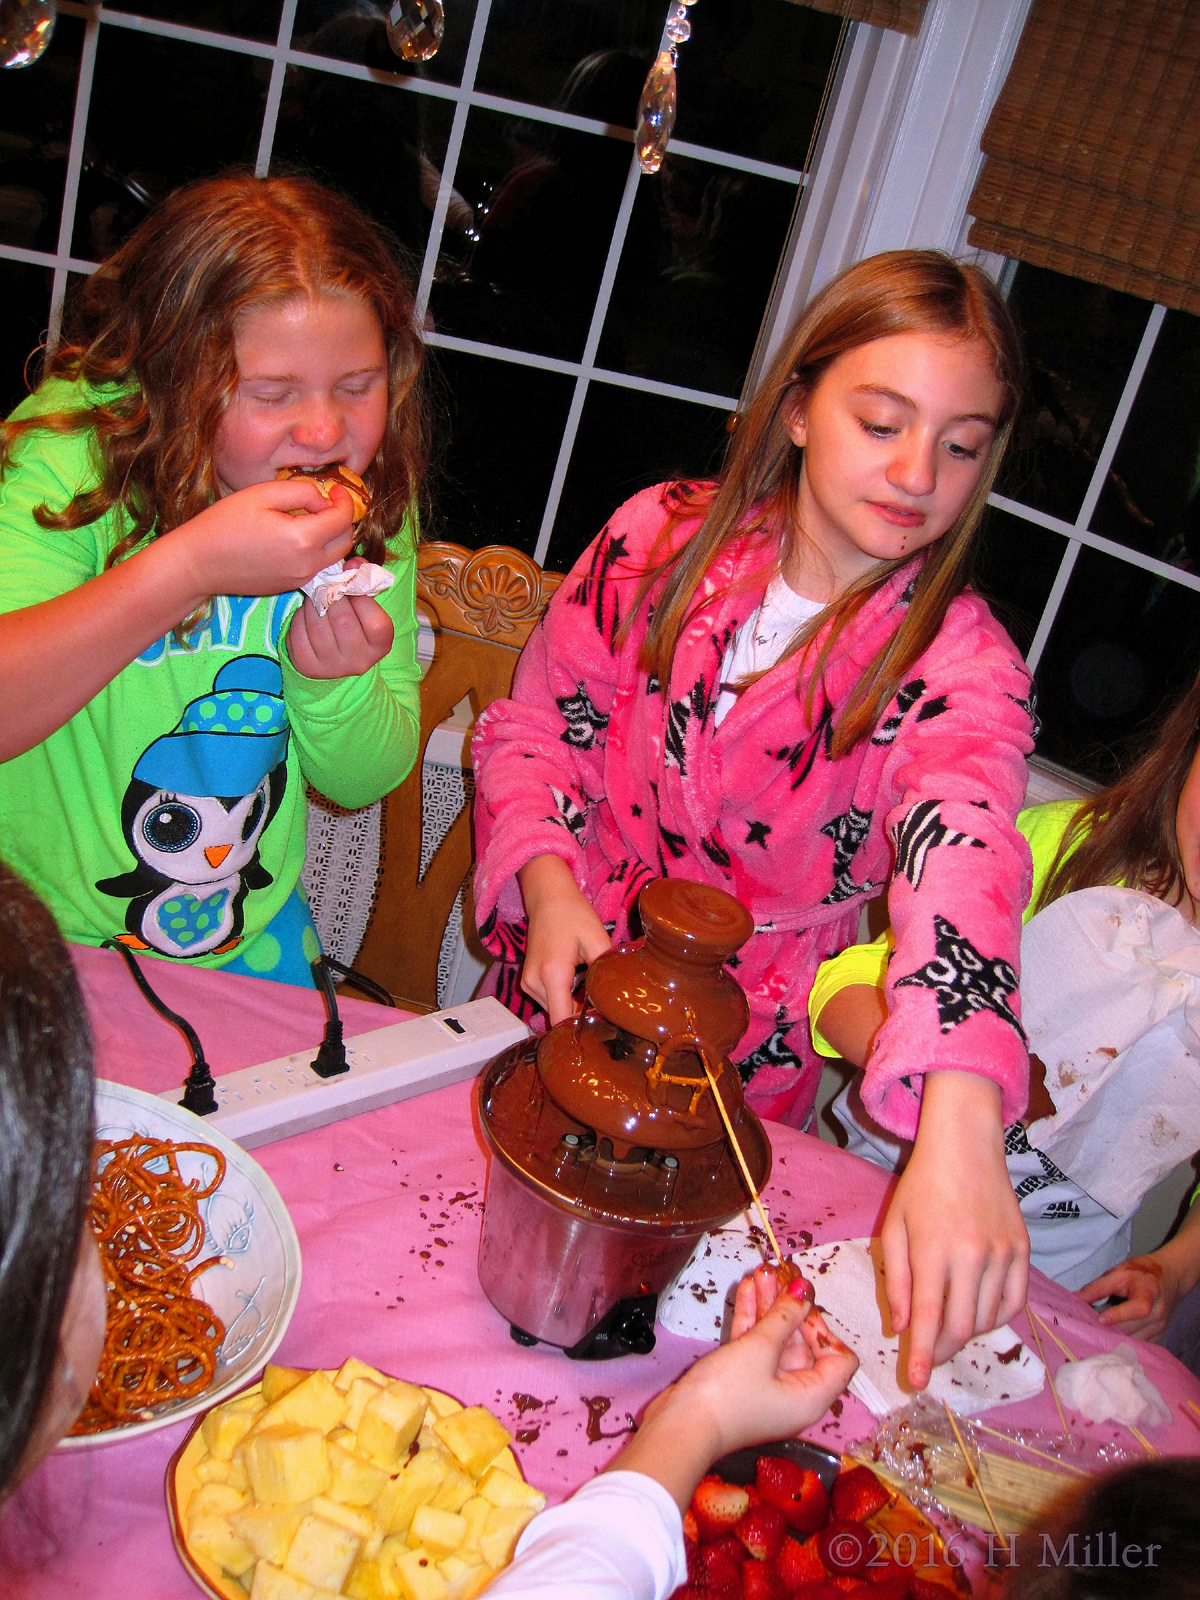 The Spa Party Guests Are Busy With The Delicious Chocolate Fondue Dessert! 